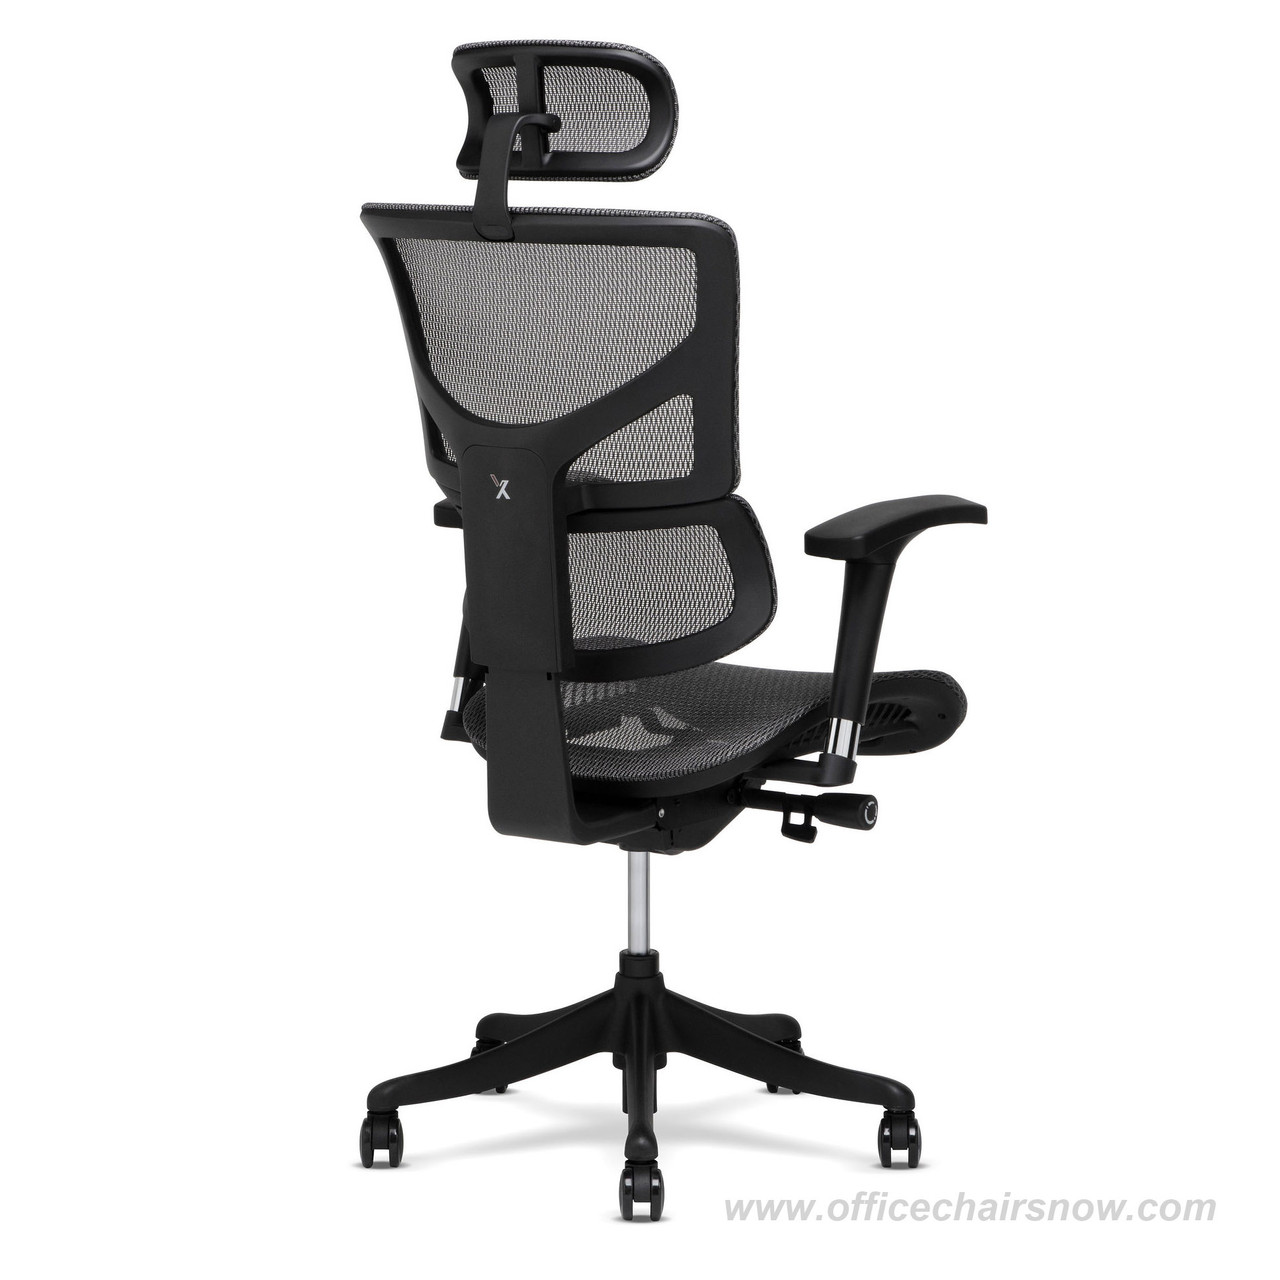 X-Chair X1 High End Task Chair, Black Flex Mesh with Headrest - Ergonomic  Office Seat/Dynamic Variable Lumbar Support/Highly Adjustable/Relaxed